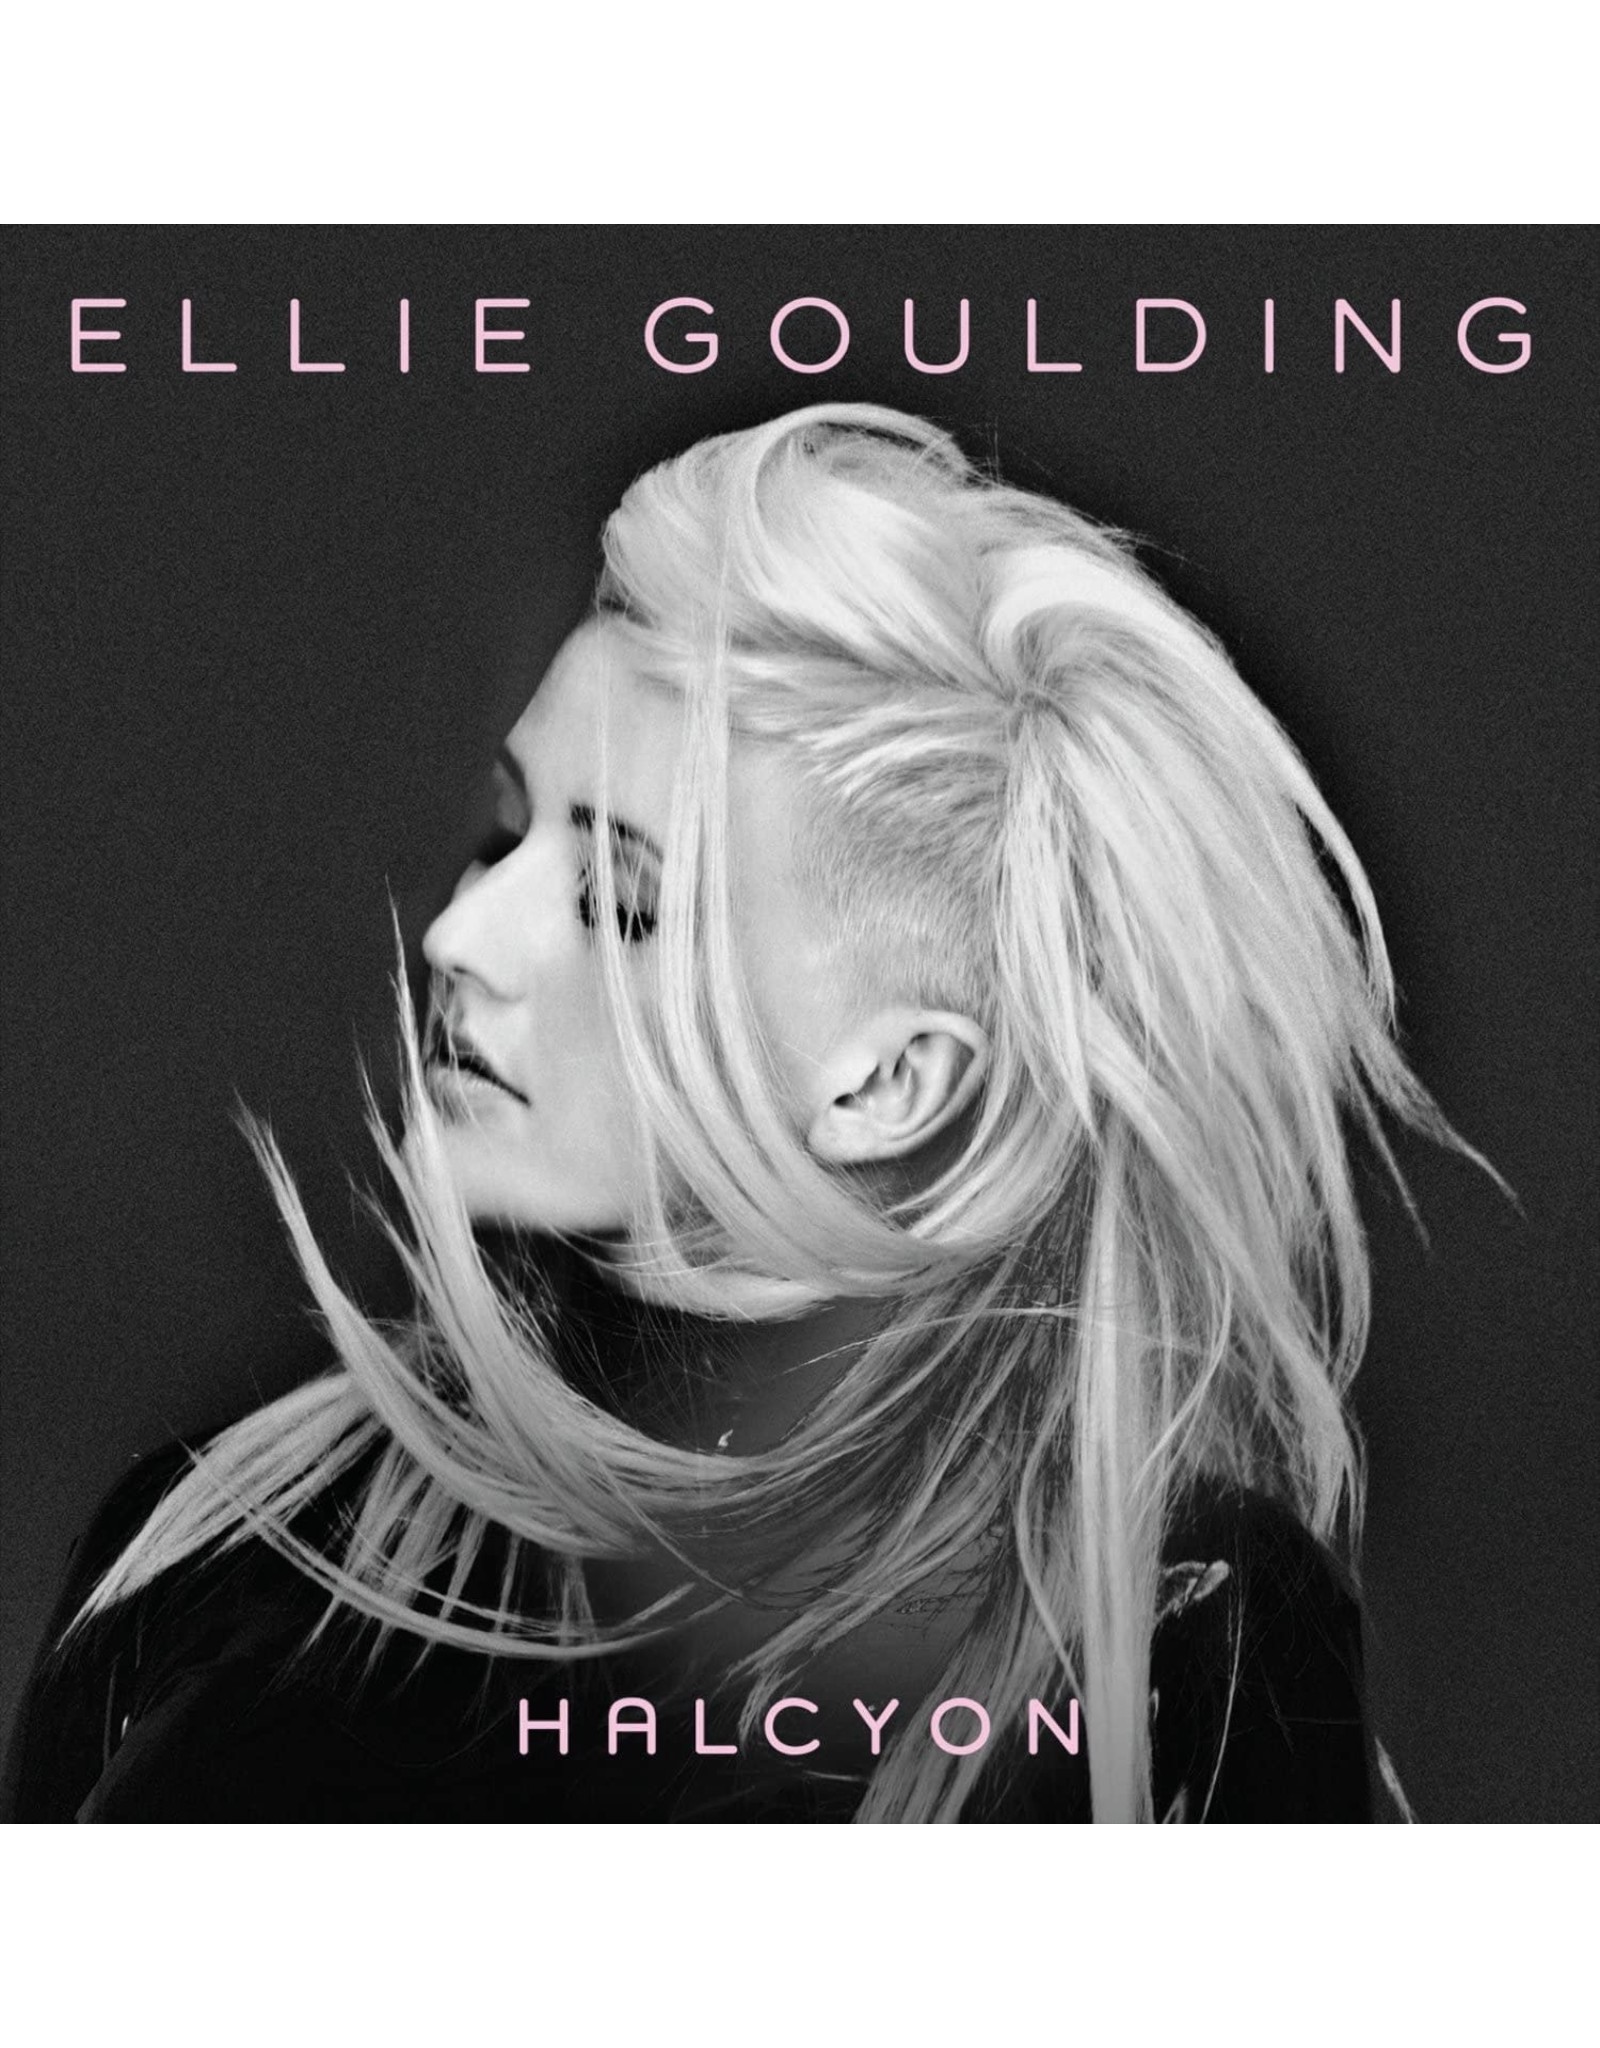 Ellie Goulding - Halcyon (Deluxe Edition)